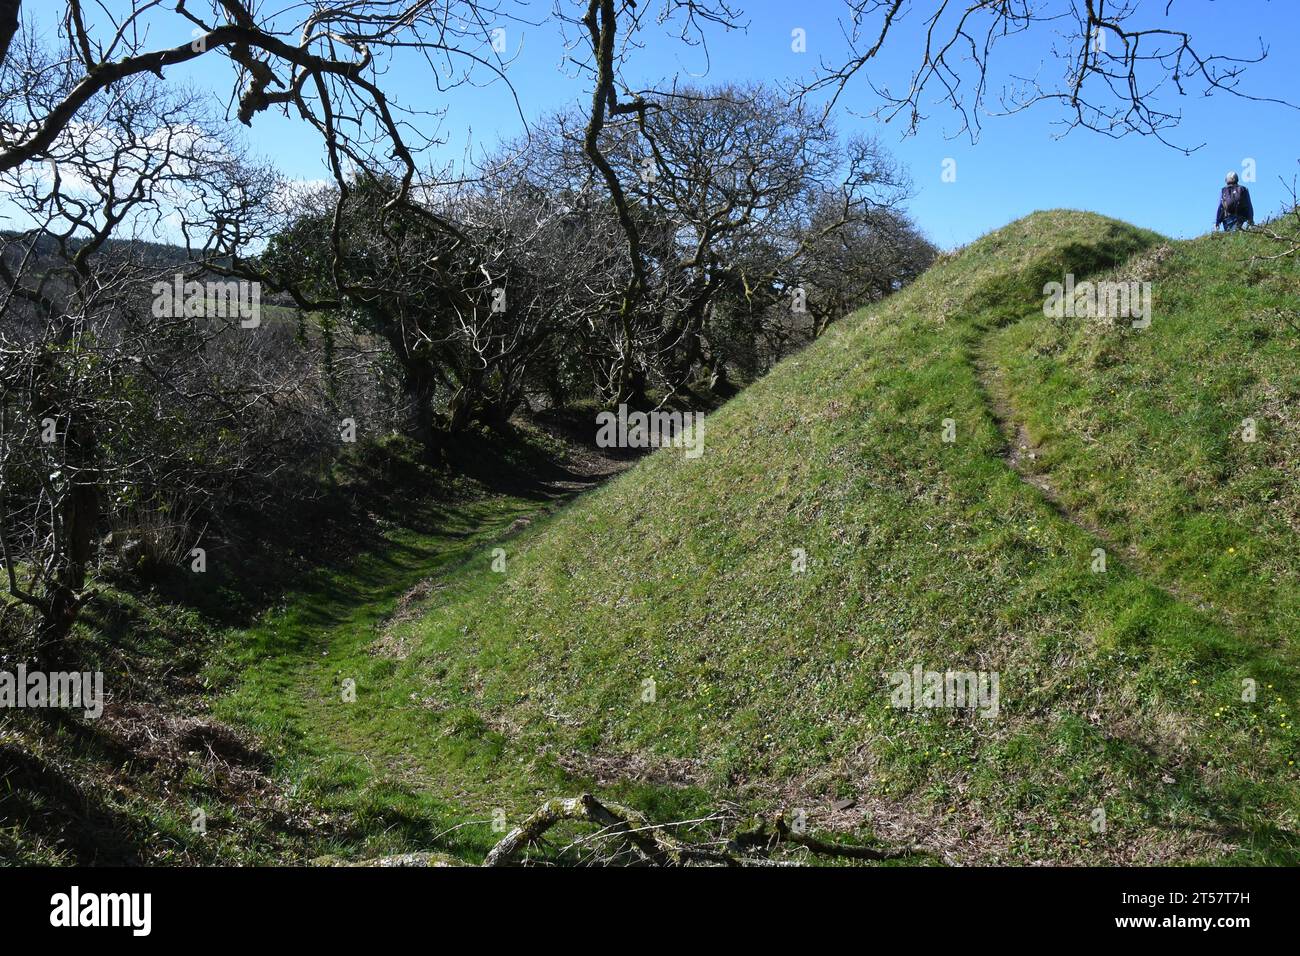 Steep slopes of Kilkhampton castle also known as Penstowe Castle, medieval fort of Motte and Bailey construction built on a knoll protected by steep s Stock Photo